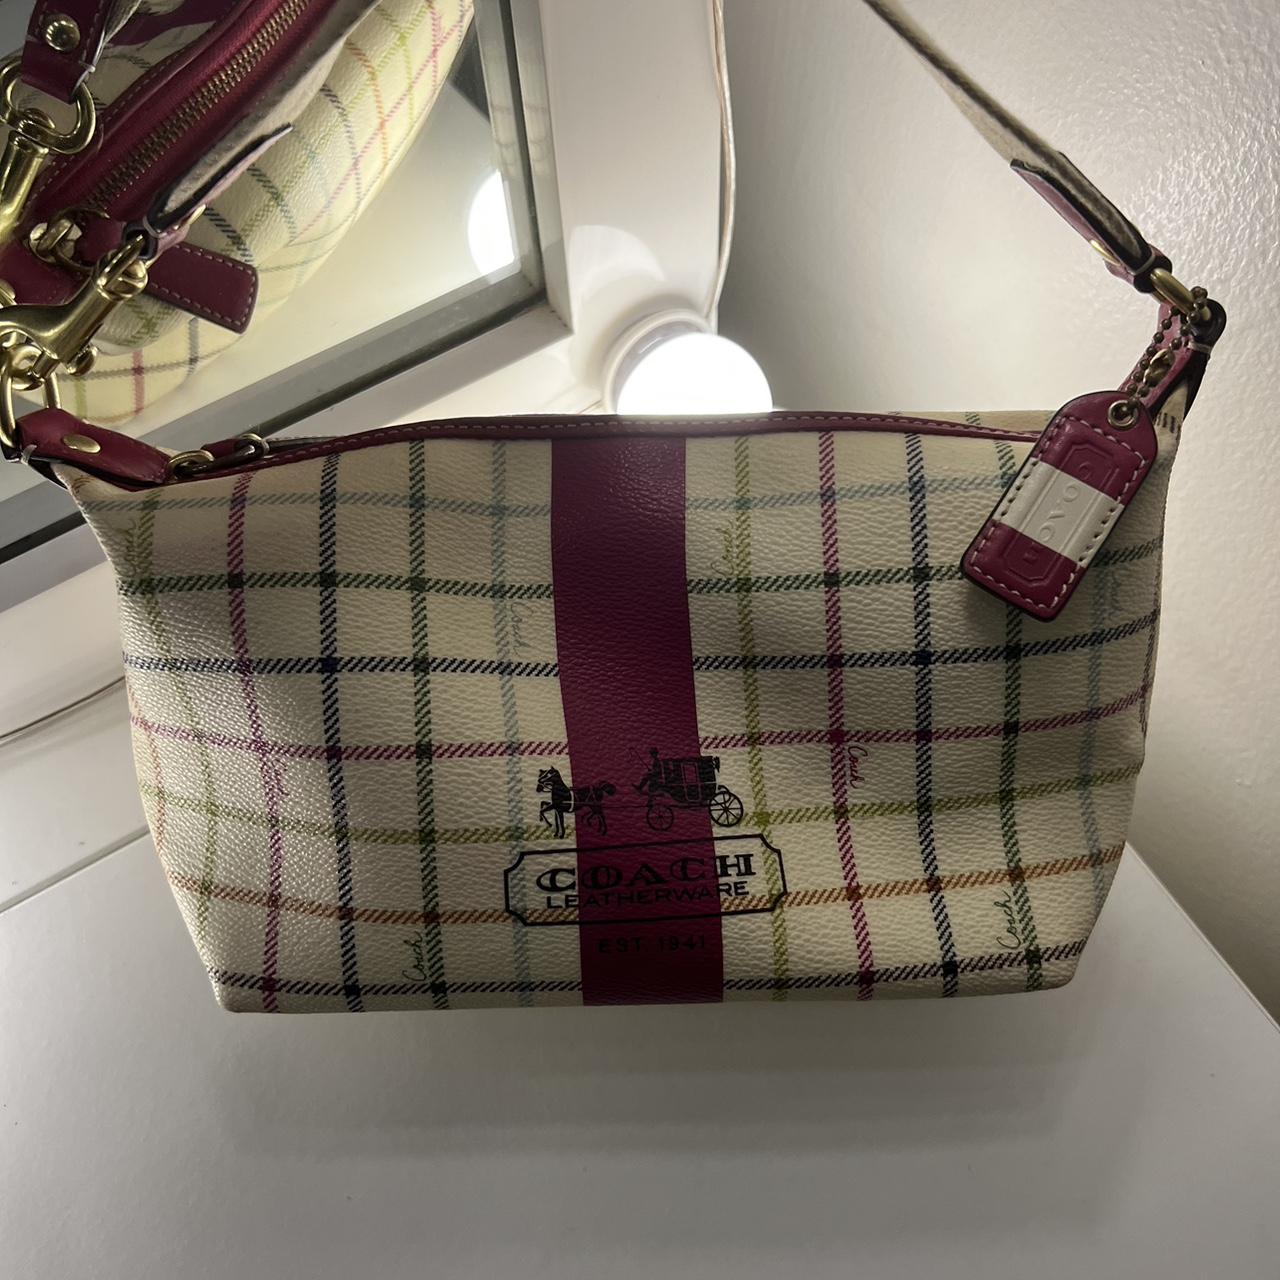 Authentic Coach Signature Collection Gallery Style East West Tote  J-1075-F16561 Brown Mono - Totes - Warsaw, Indiana | Facebook Marketplace |  Facebook